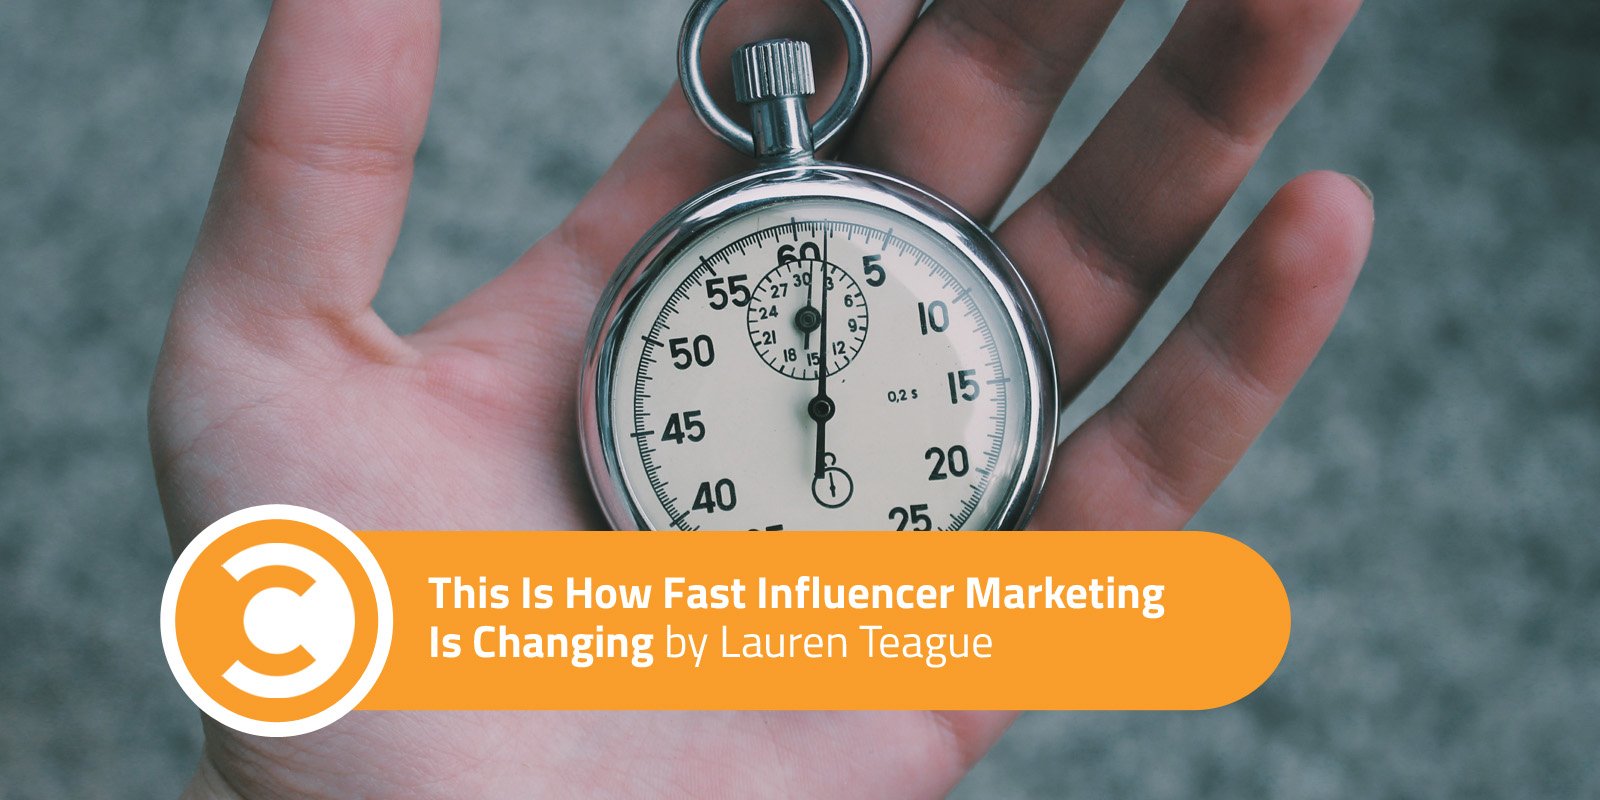 This Is How Fast Influencer Marketing Is Changing